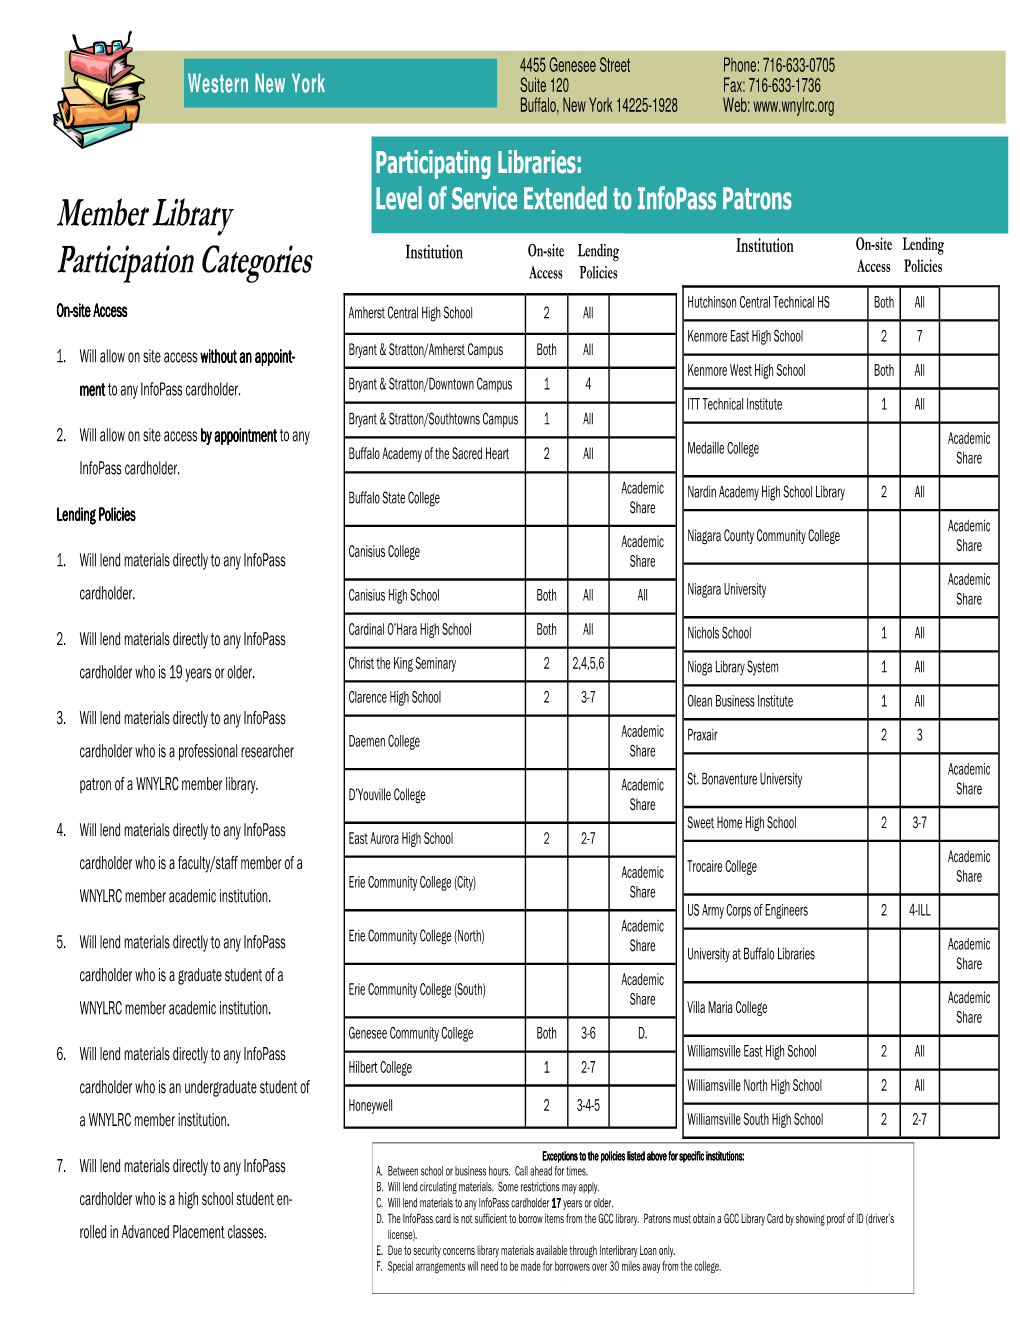 WNY Library Access Guide Brochure-Rev 2-14